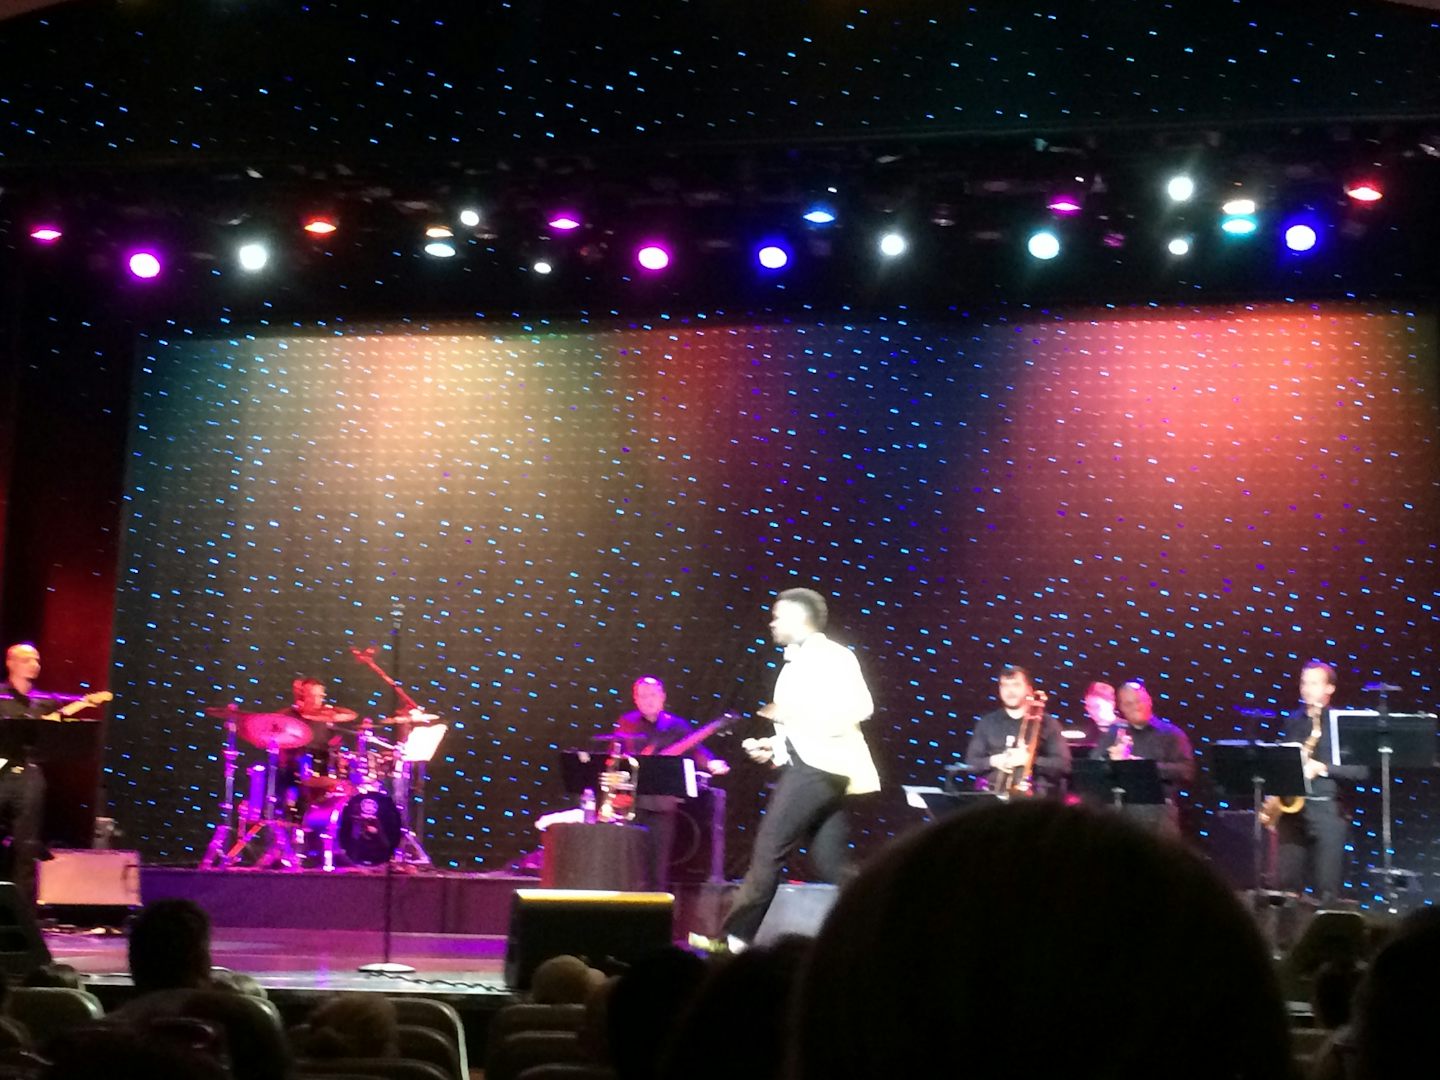 Giovanni (Motown style entertainer) - Palace Theatre